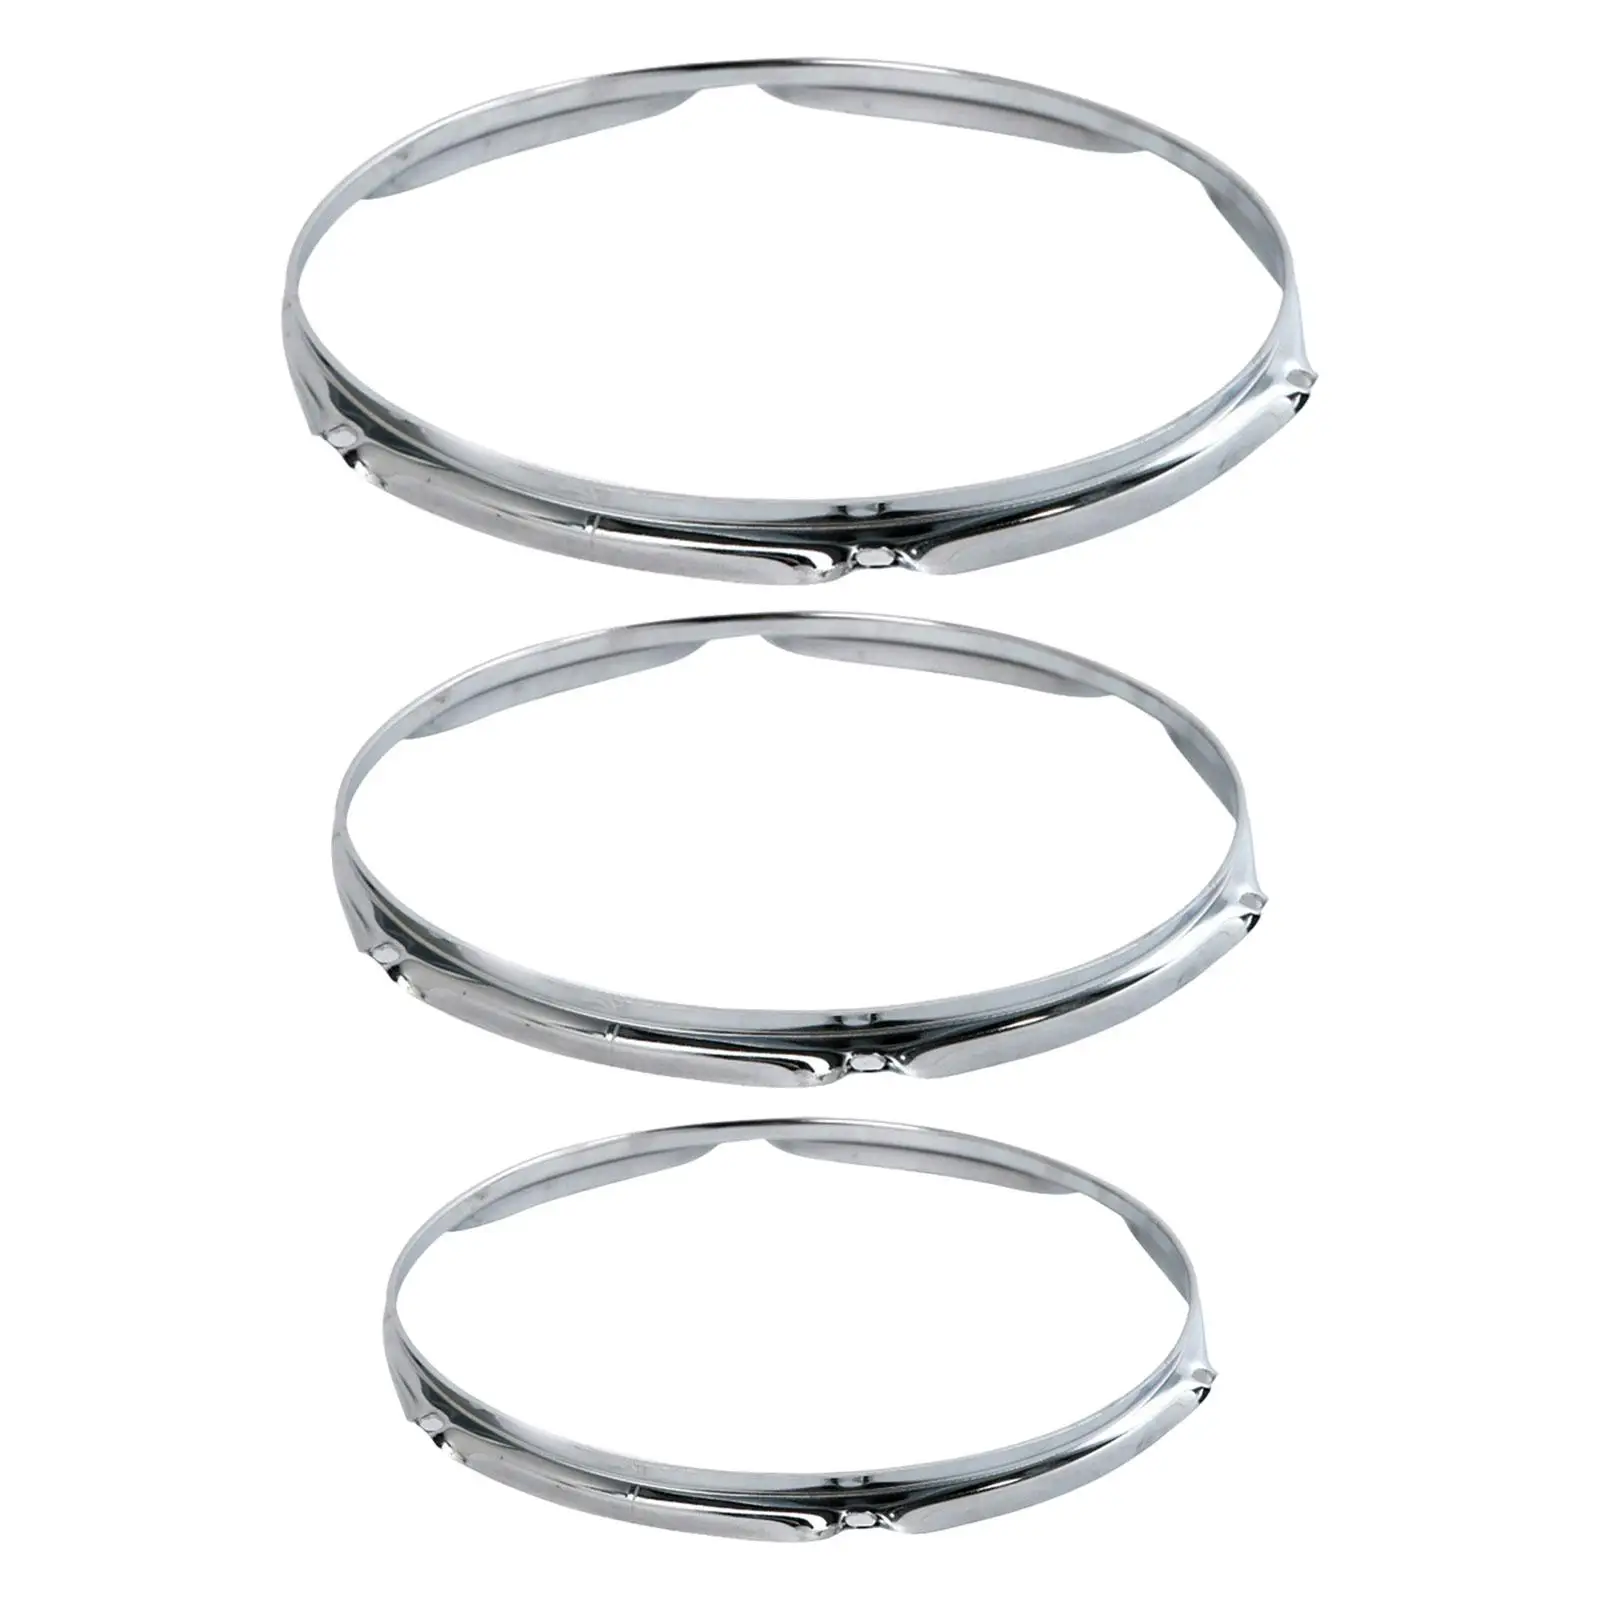 Snare Drum Batter Heavy Duty Portable Replacement Musical Accessory 6 Hole Drum Rim for Maintain Daily Use Repair Office Show